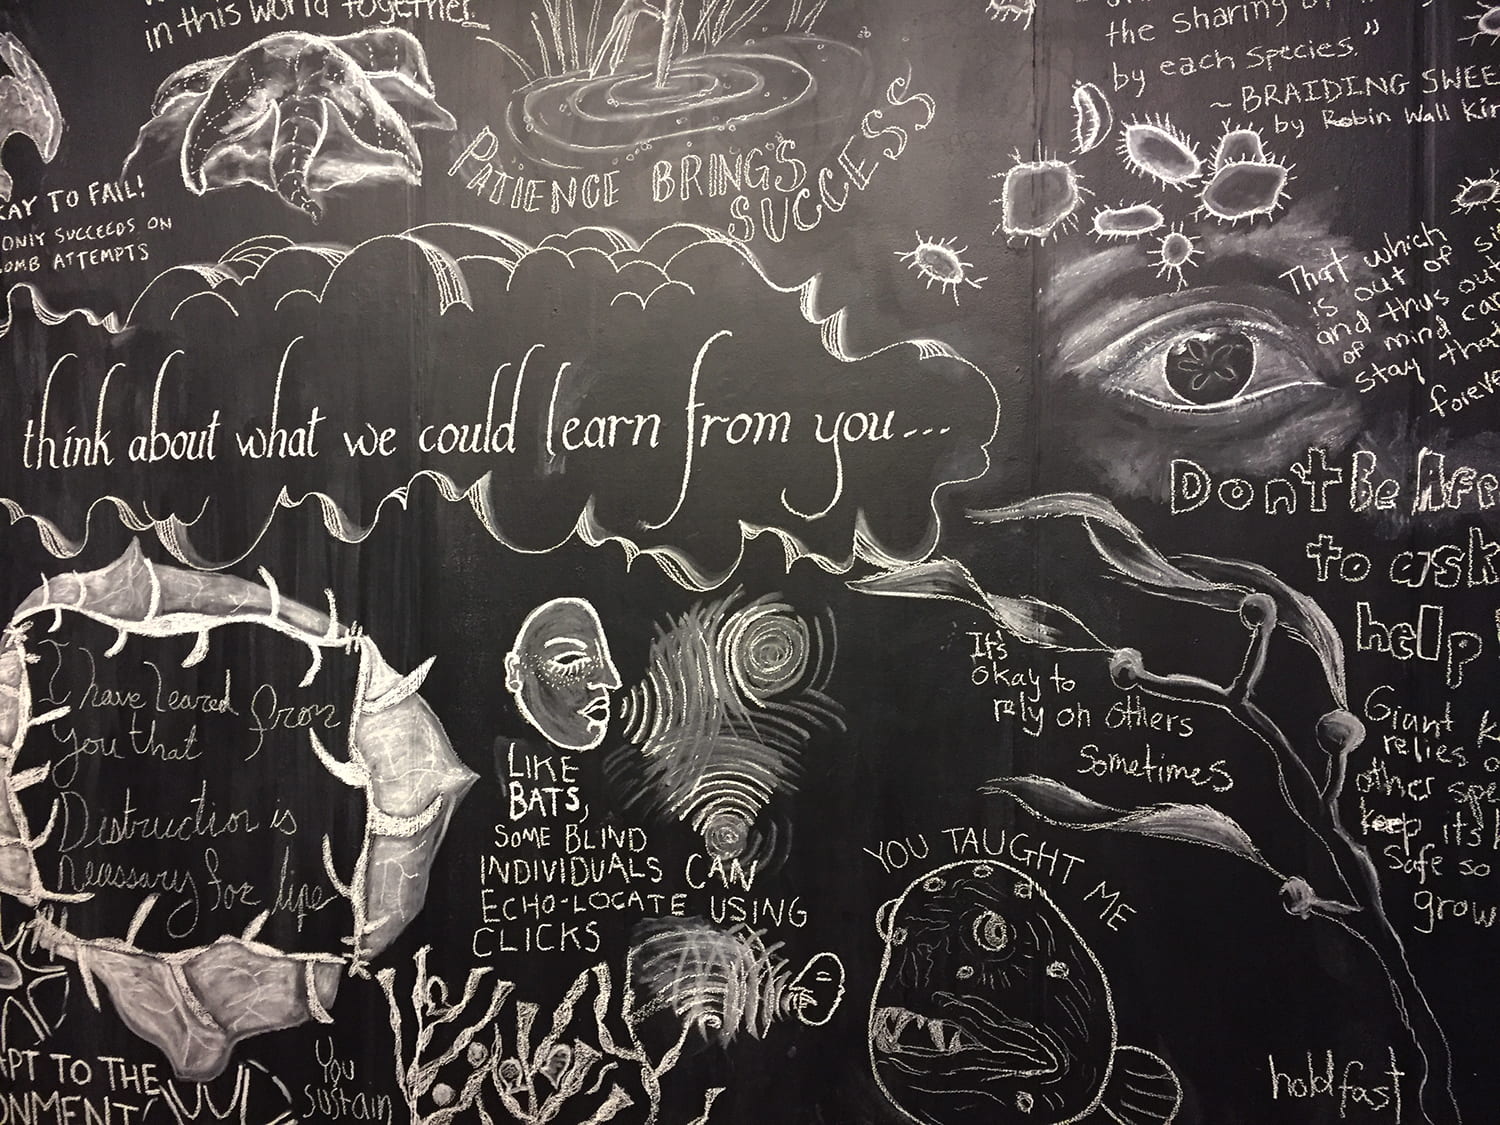 Several labeled drawings surround the words "think about what we could learn from you..."